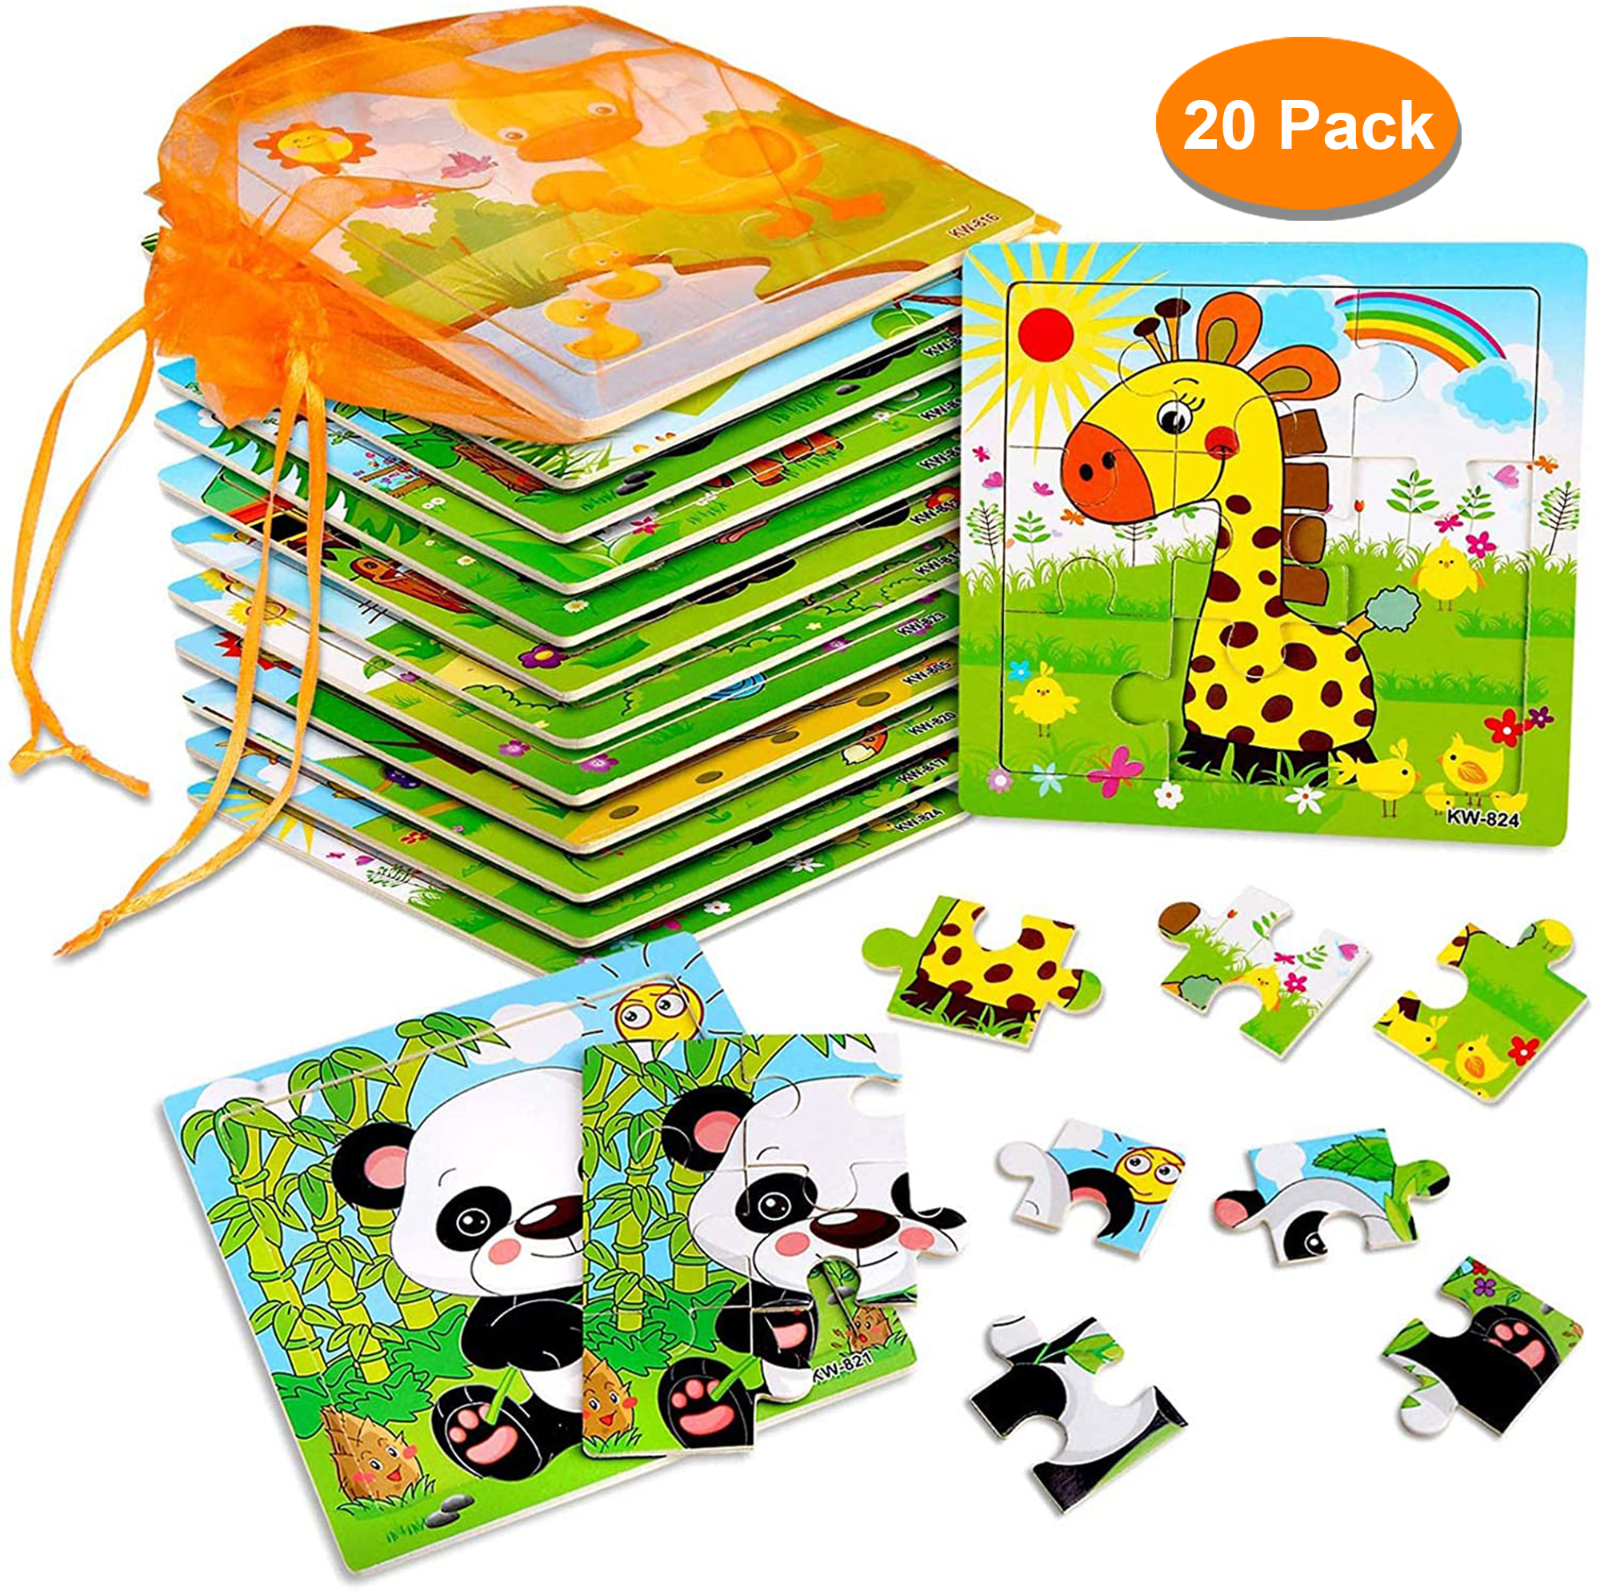 20 Pack Wooden Jigsaw Puzzles For Toddlers Baby Kids  3 4 5years Old Color Shape